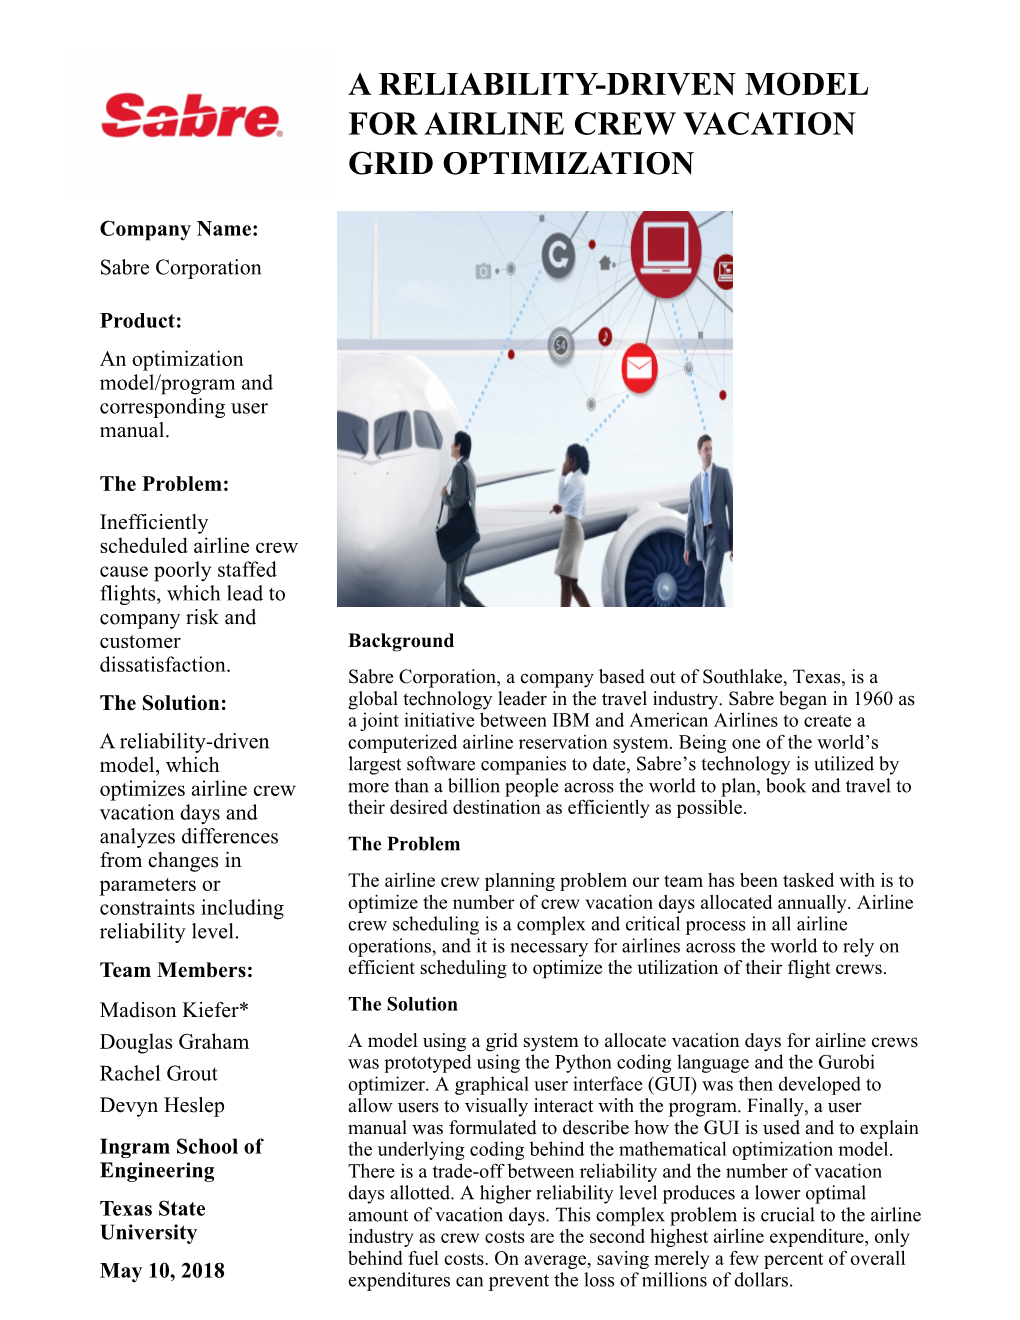 A Reliability-Driven Model for Airline Crew Vacation Grid Optimization